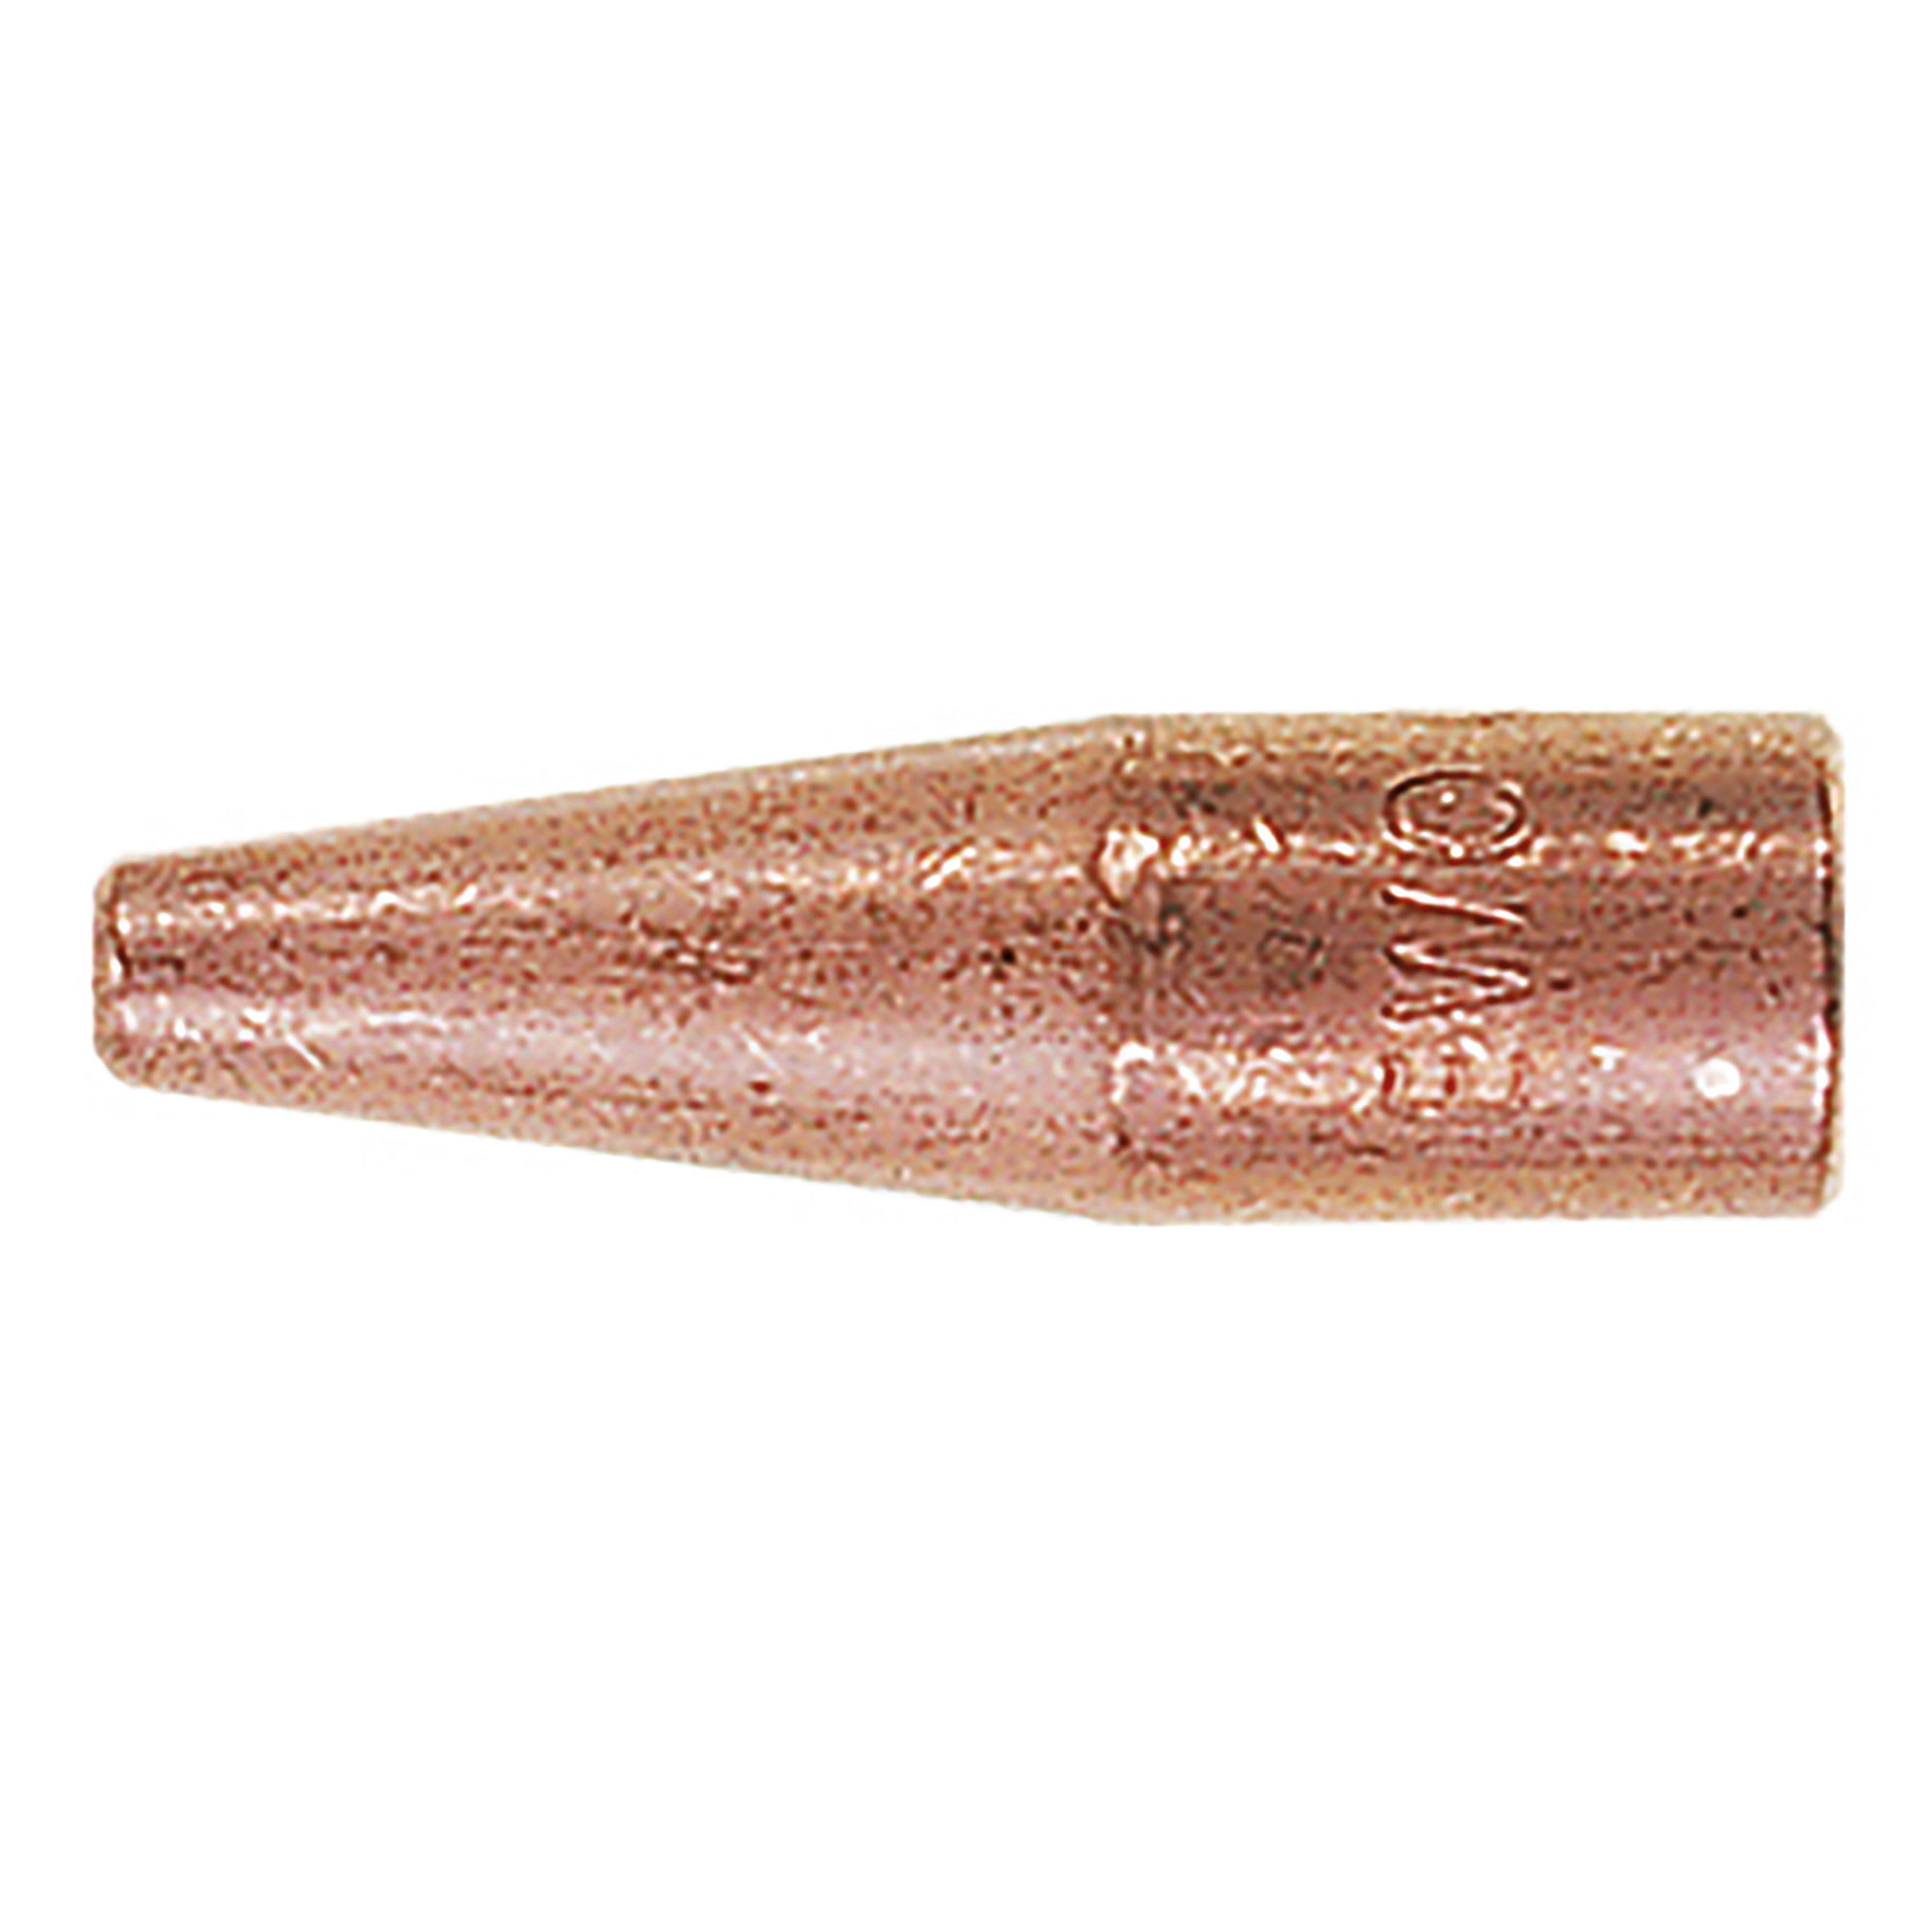 Warming nozzle, size: 4, nominal range: 4 – 6 mm, thread: 10 × 28 threads, for inserts with 17 mm shank